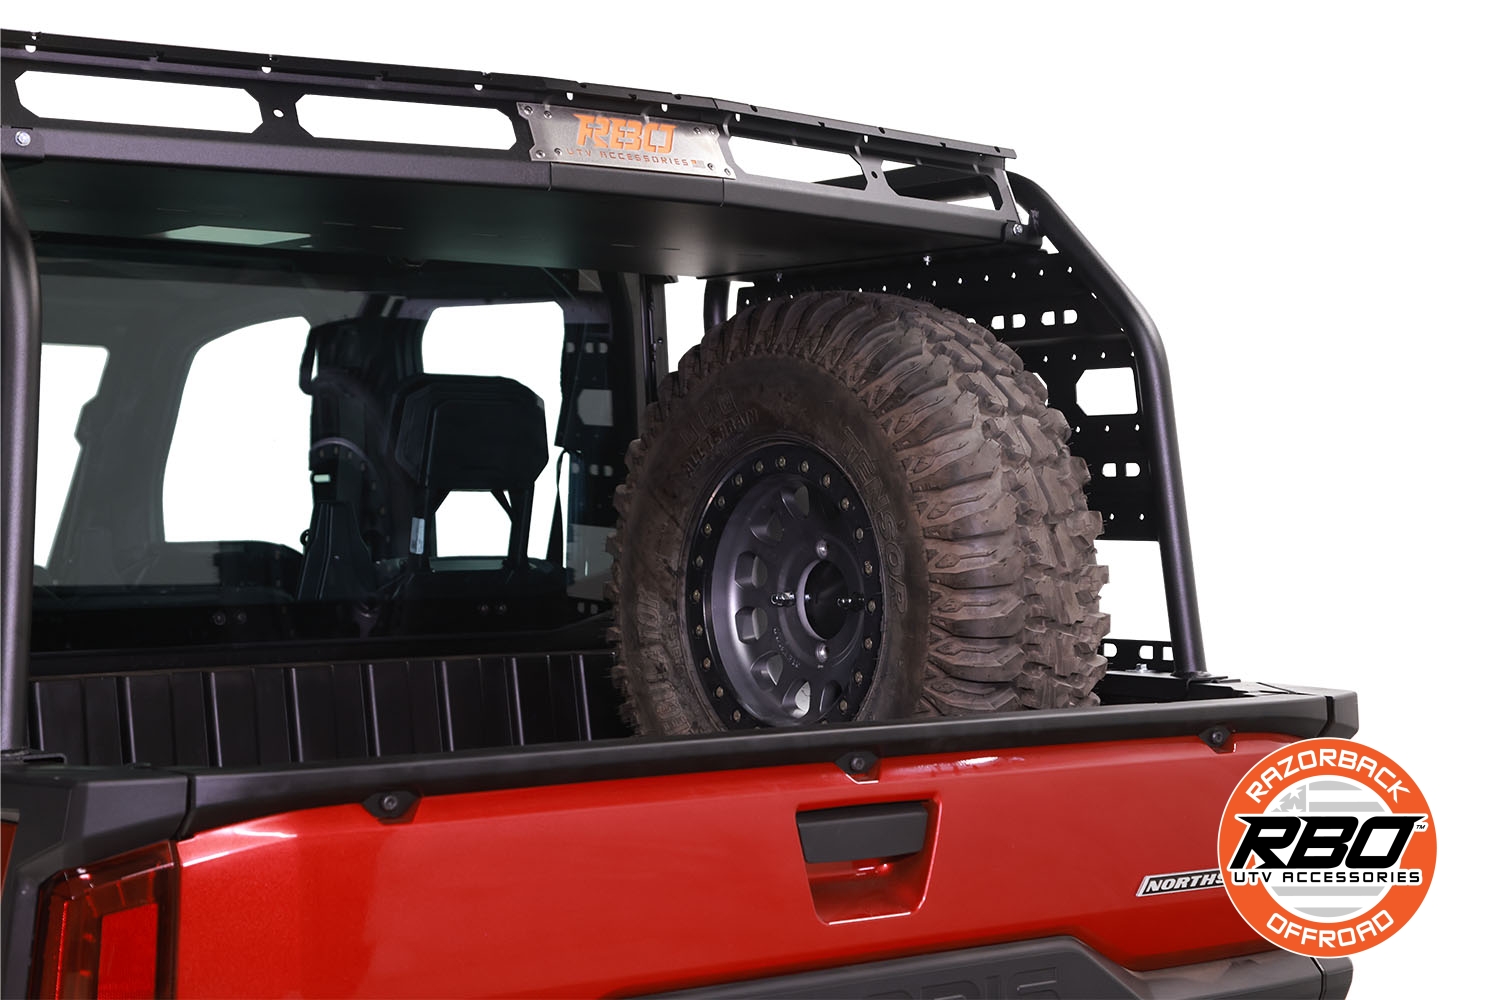 Razorback Offroad Spare Tire Mount installed in cargo area of Polaris Ranger XD 1500, with spare tire mounted.